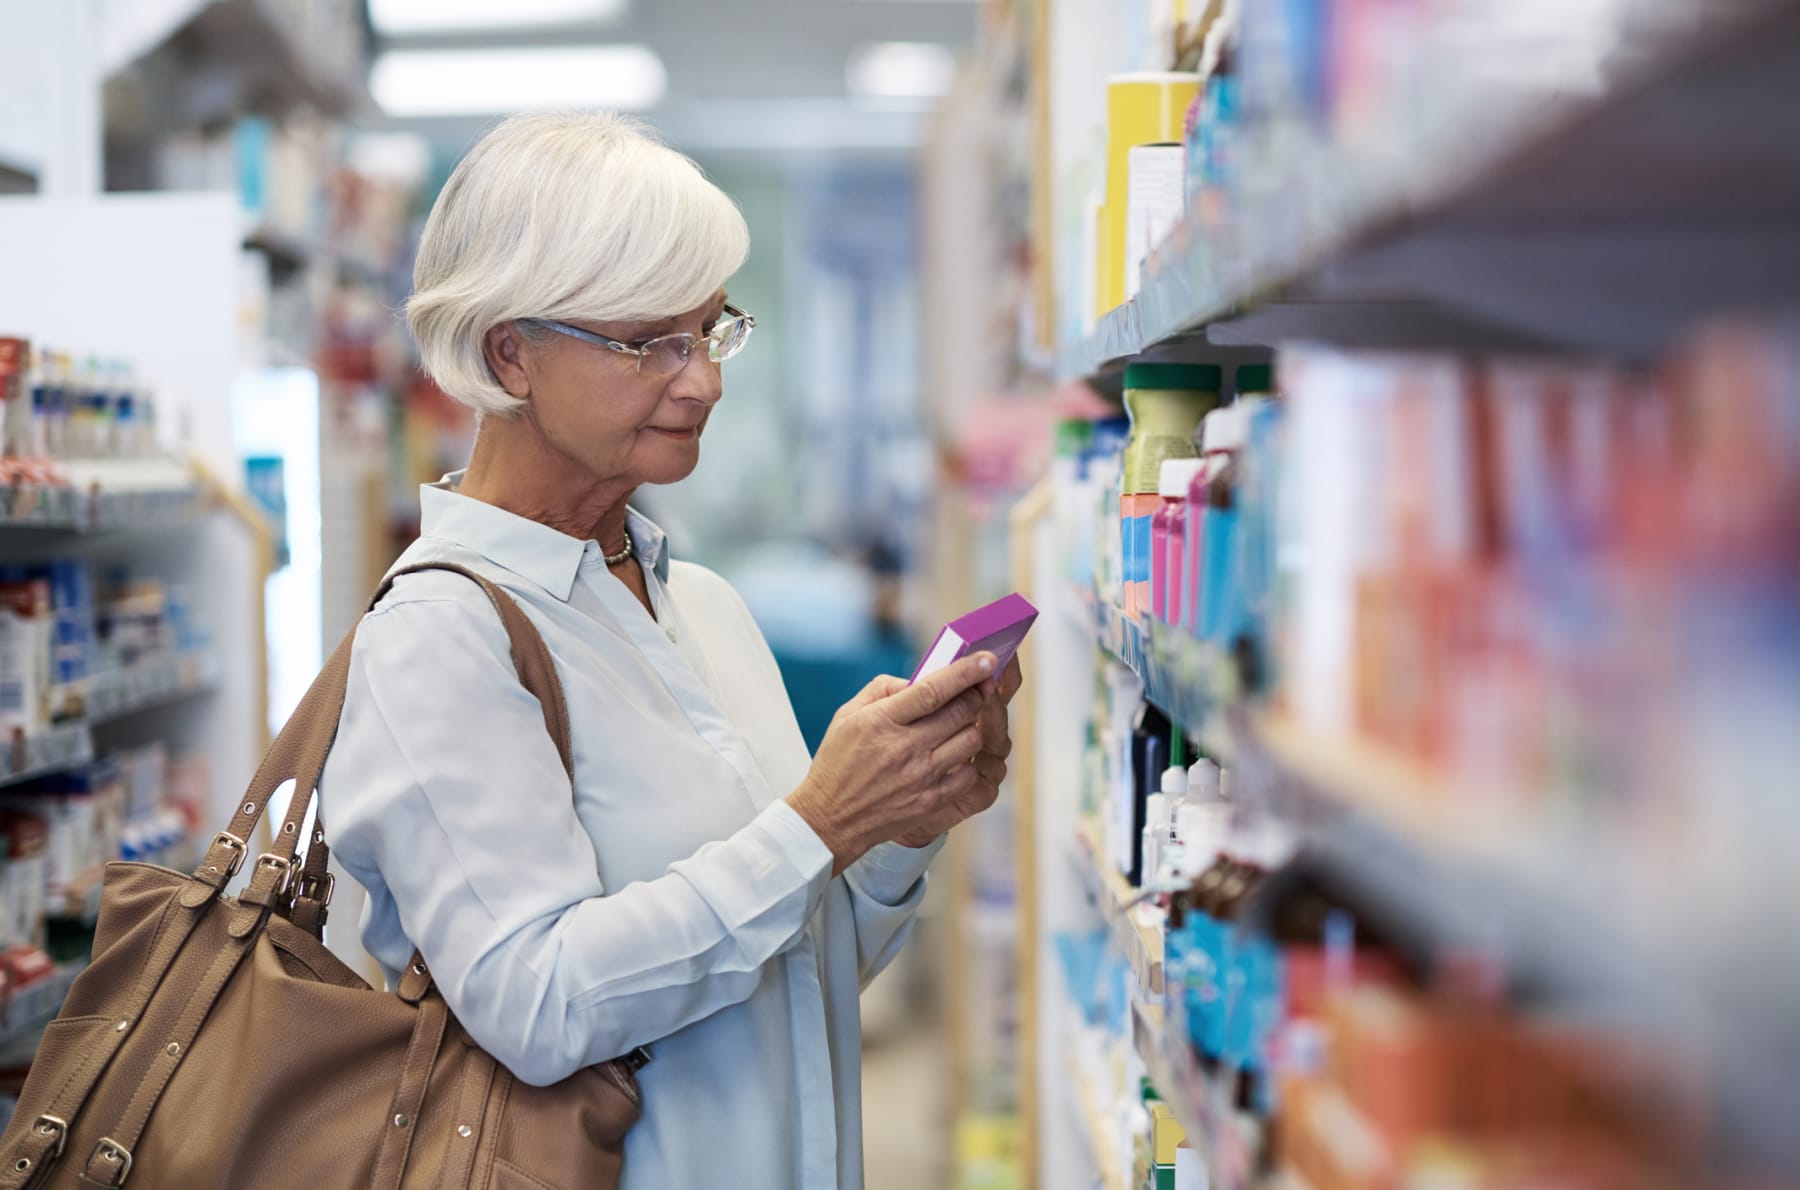 An older woman shops in-store for medication.